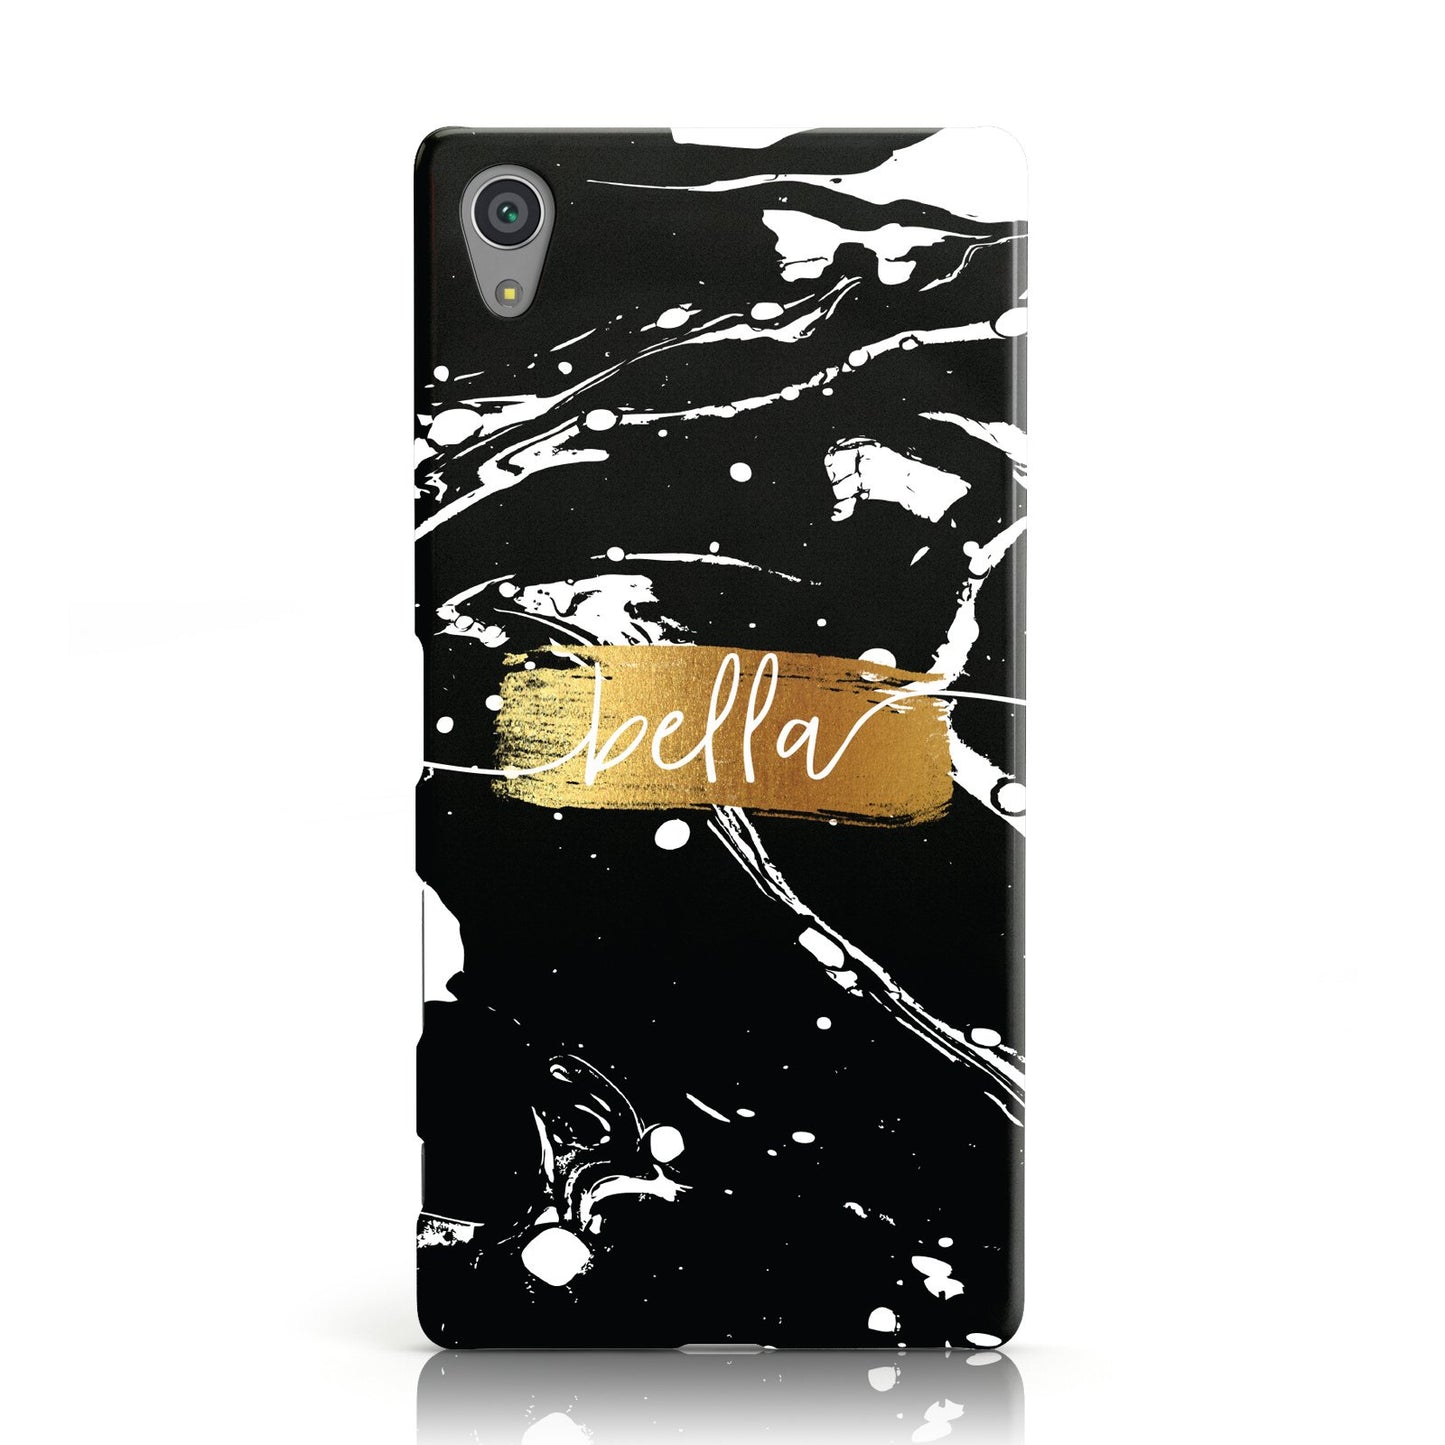 Personalised Black & Gold Swirl Marble Sony Xperia Case